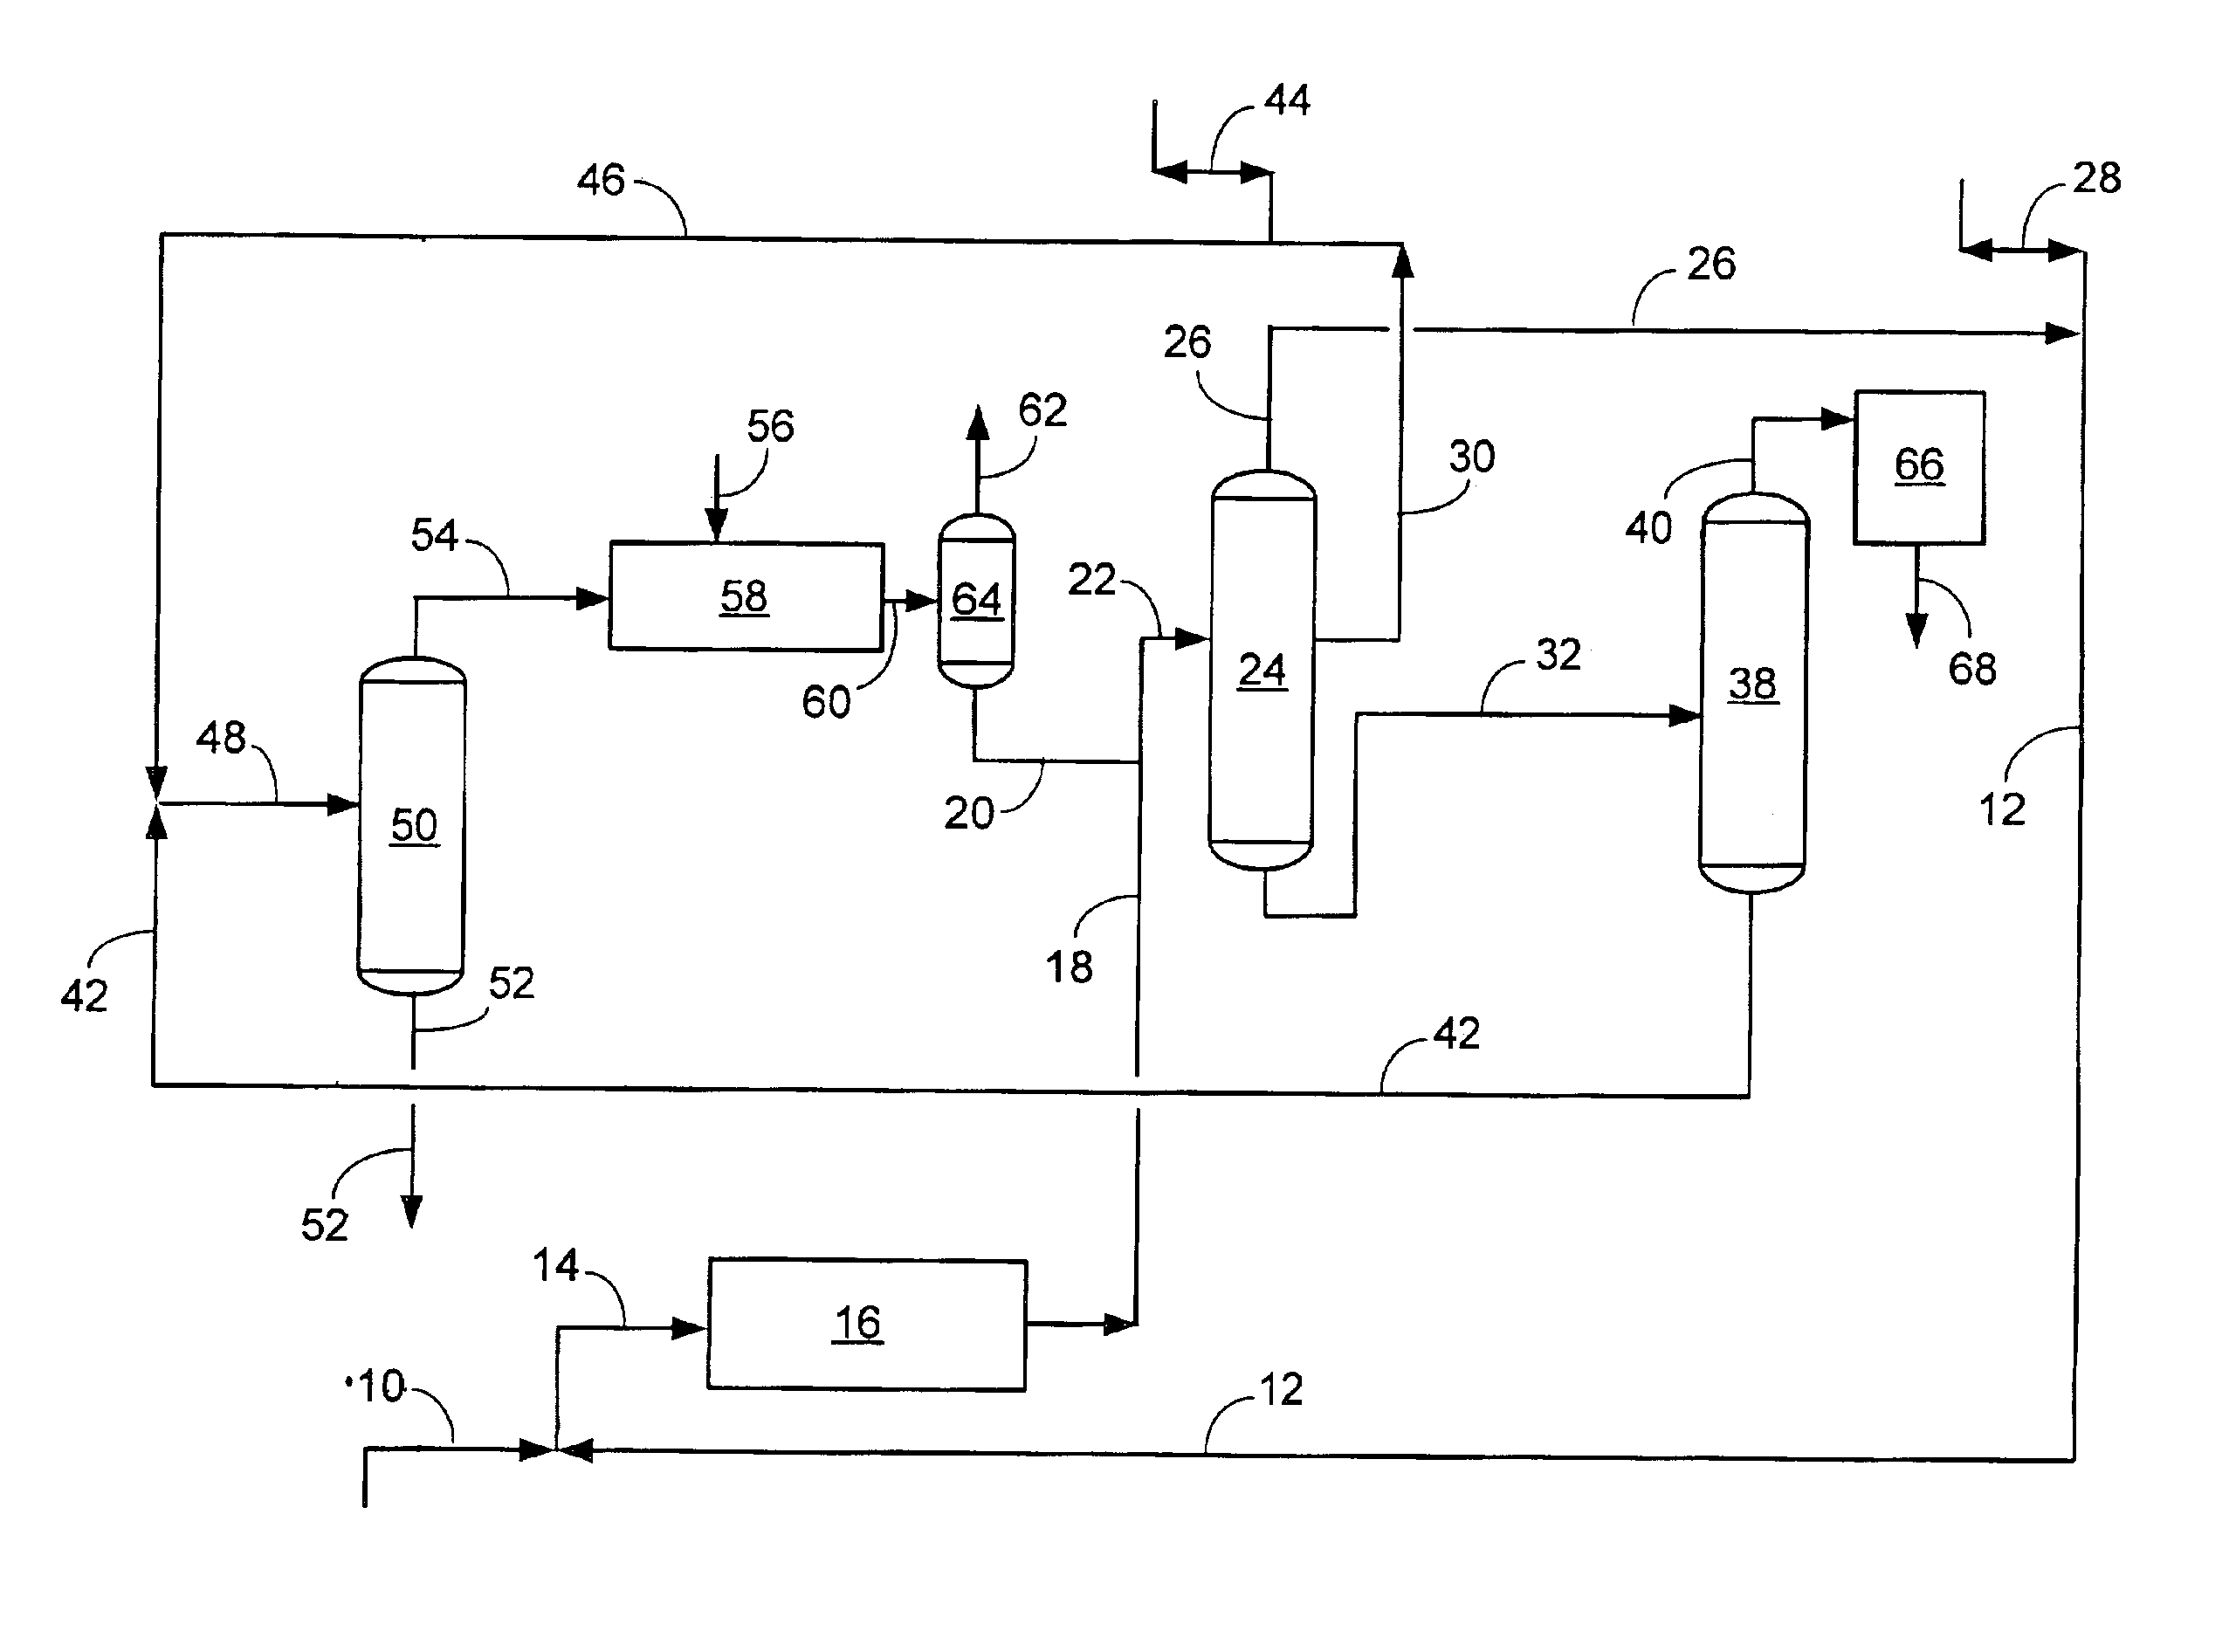 Process and apparatus for ethylbenzene production and transalkylation to xylene